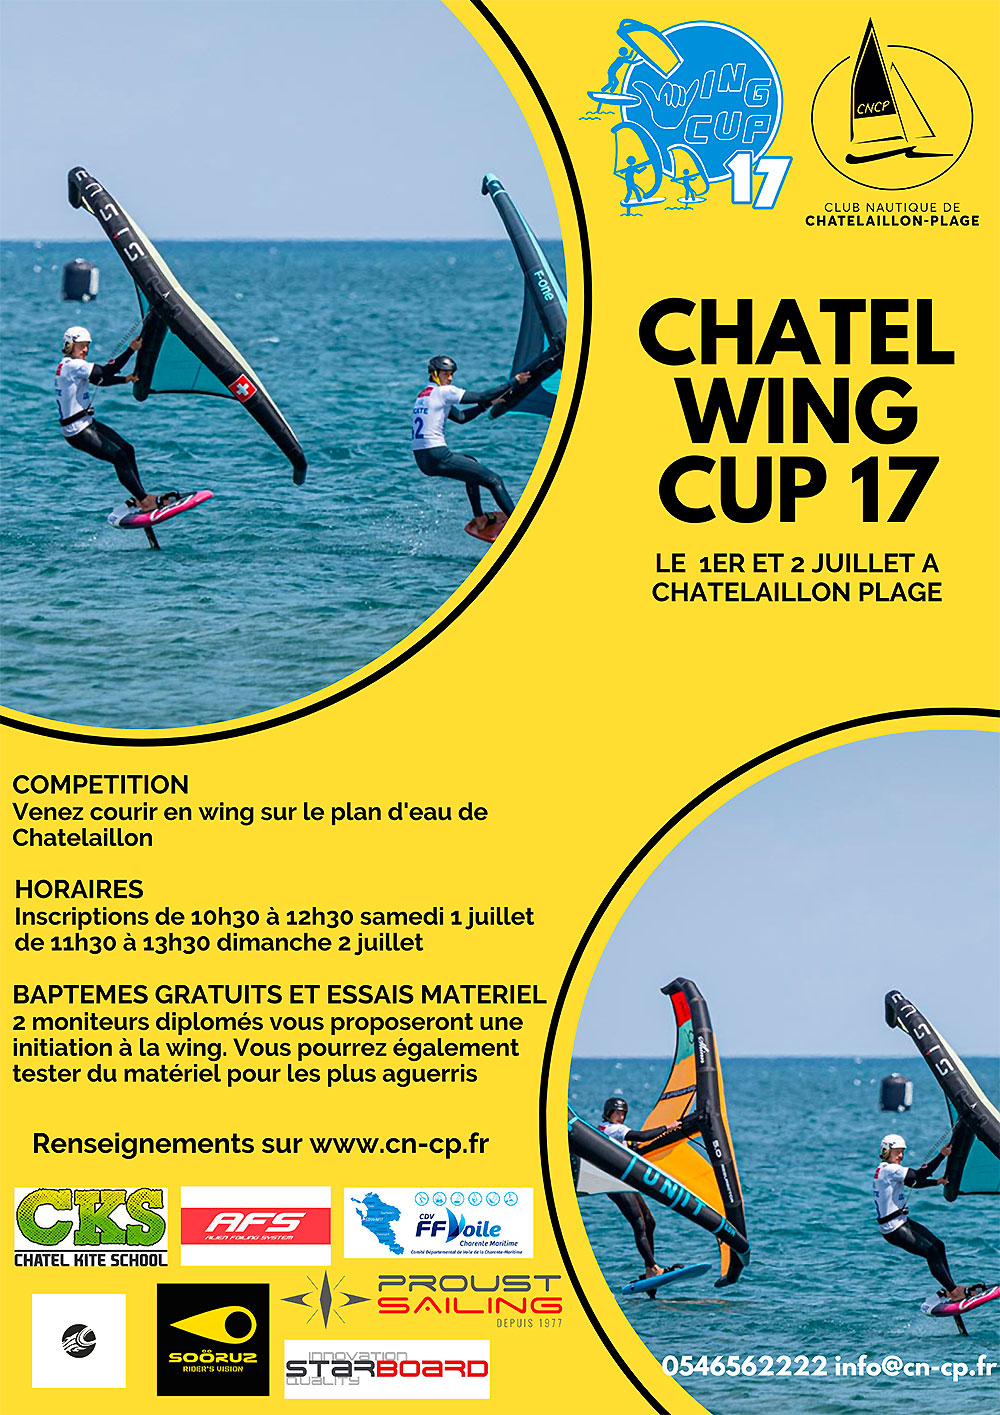 Wing Cup 17 à Chatelaillon-plage